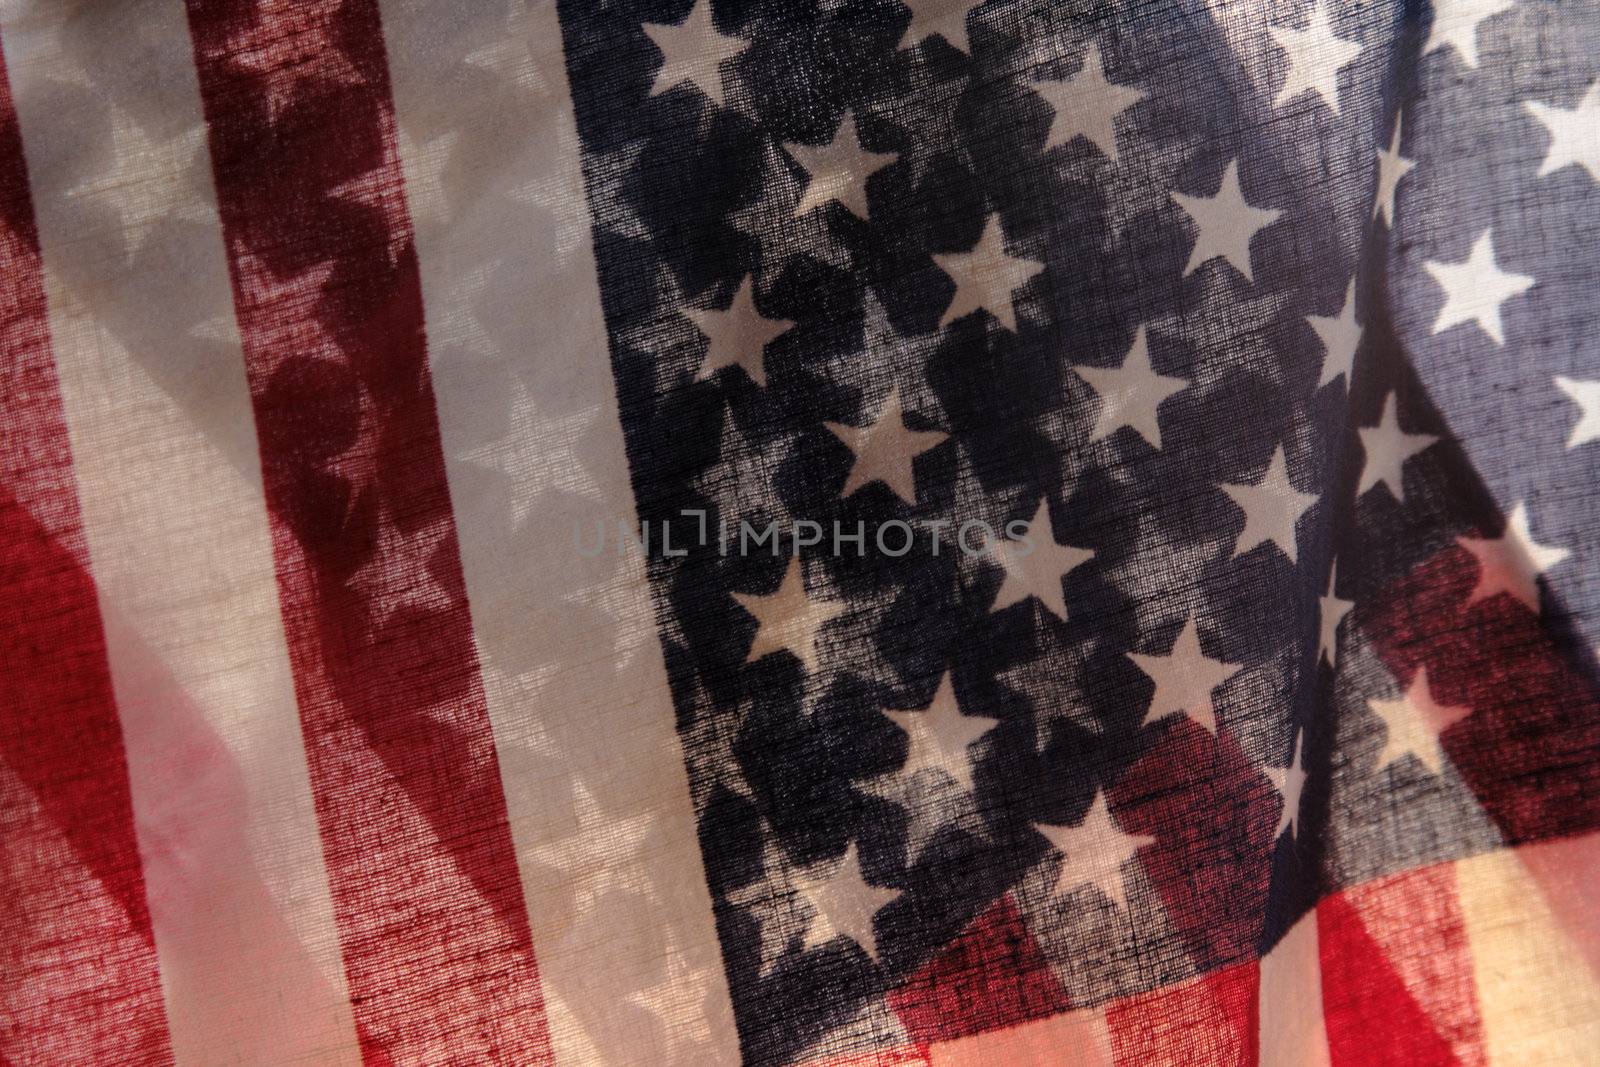 two backlit American flags in a unique view of the stars and stripes